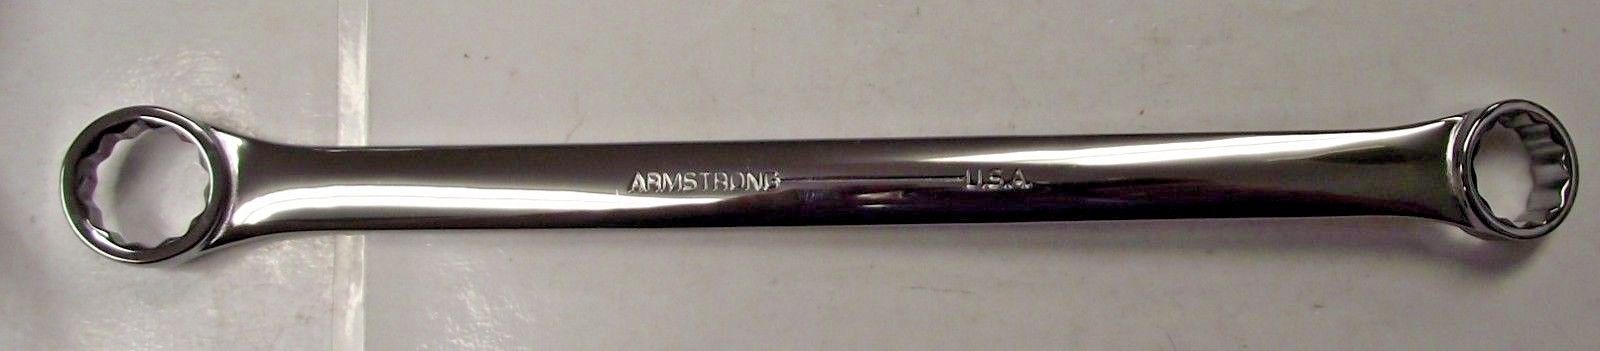 Armstrong Tools 53-715 12Pt. Box End Wrench 20mm x 22mm USA